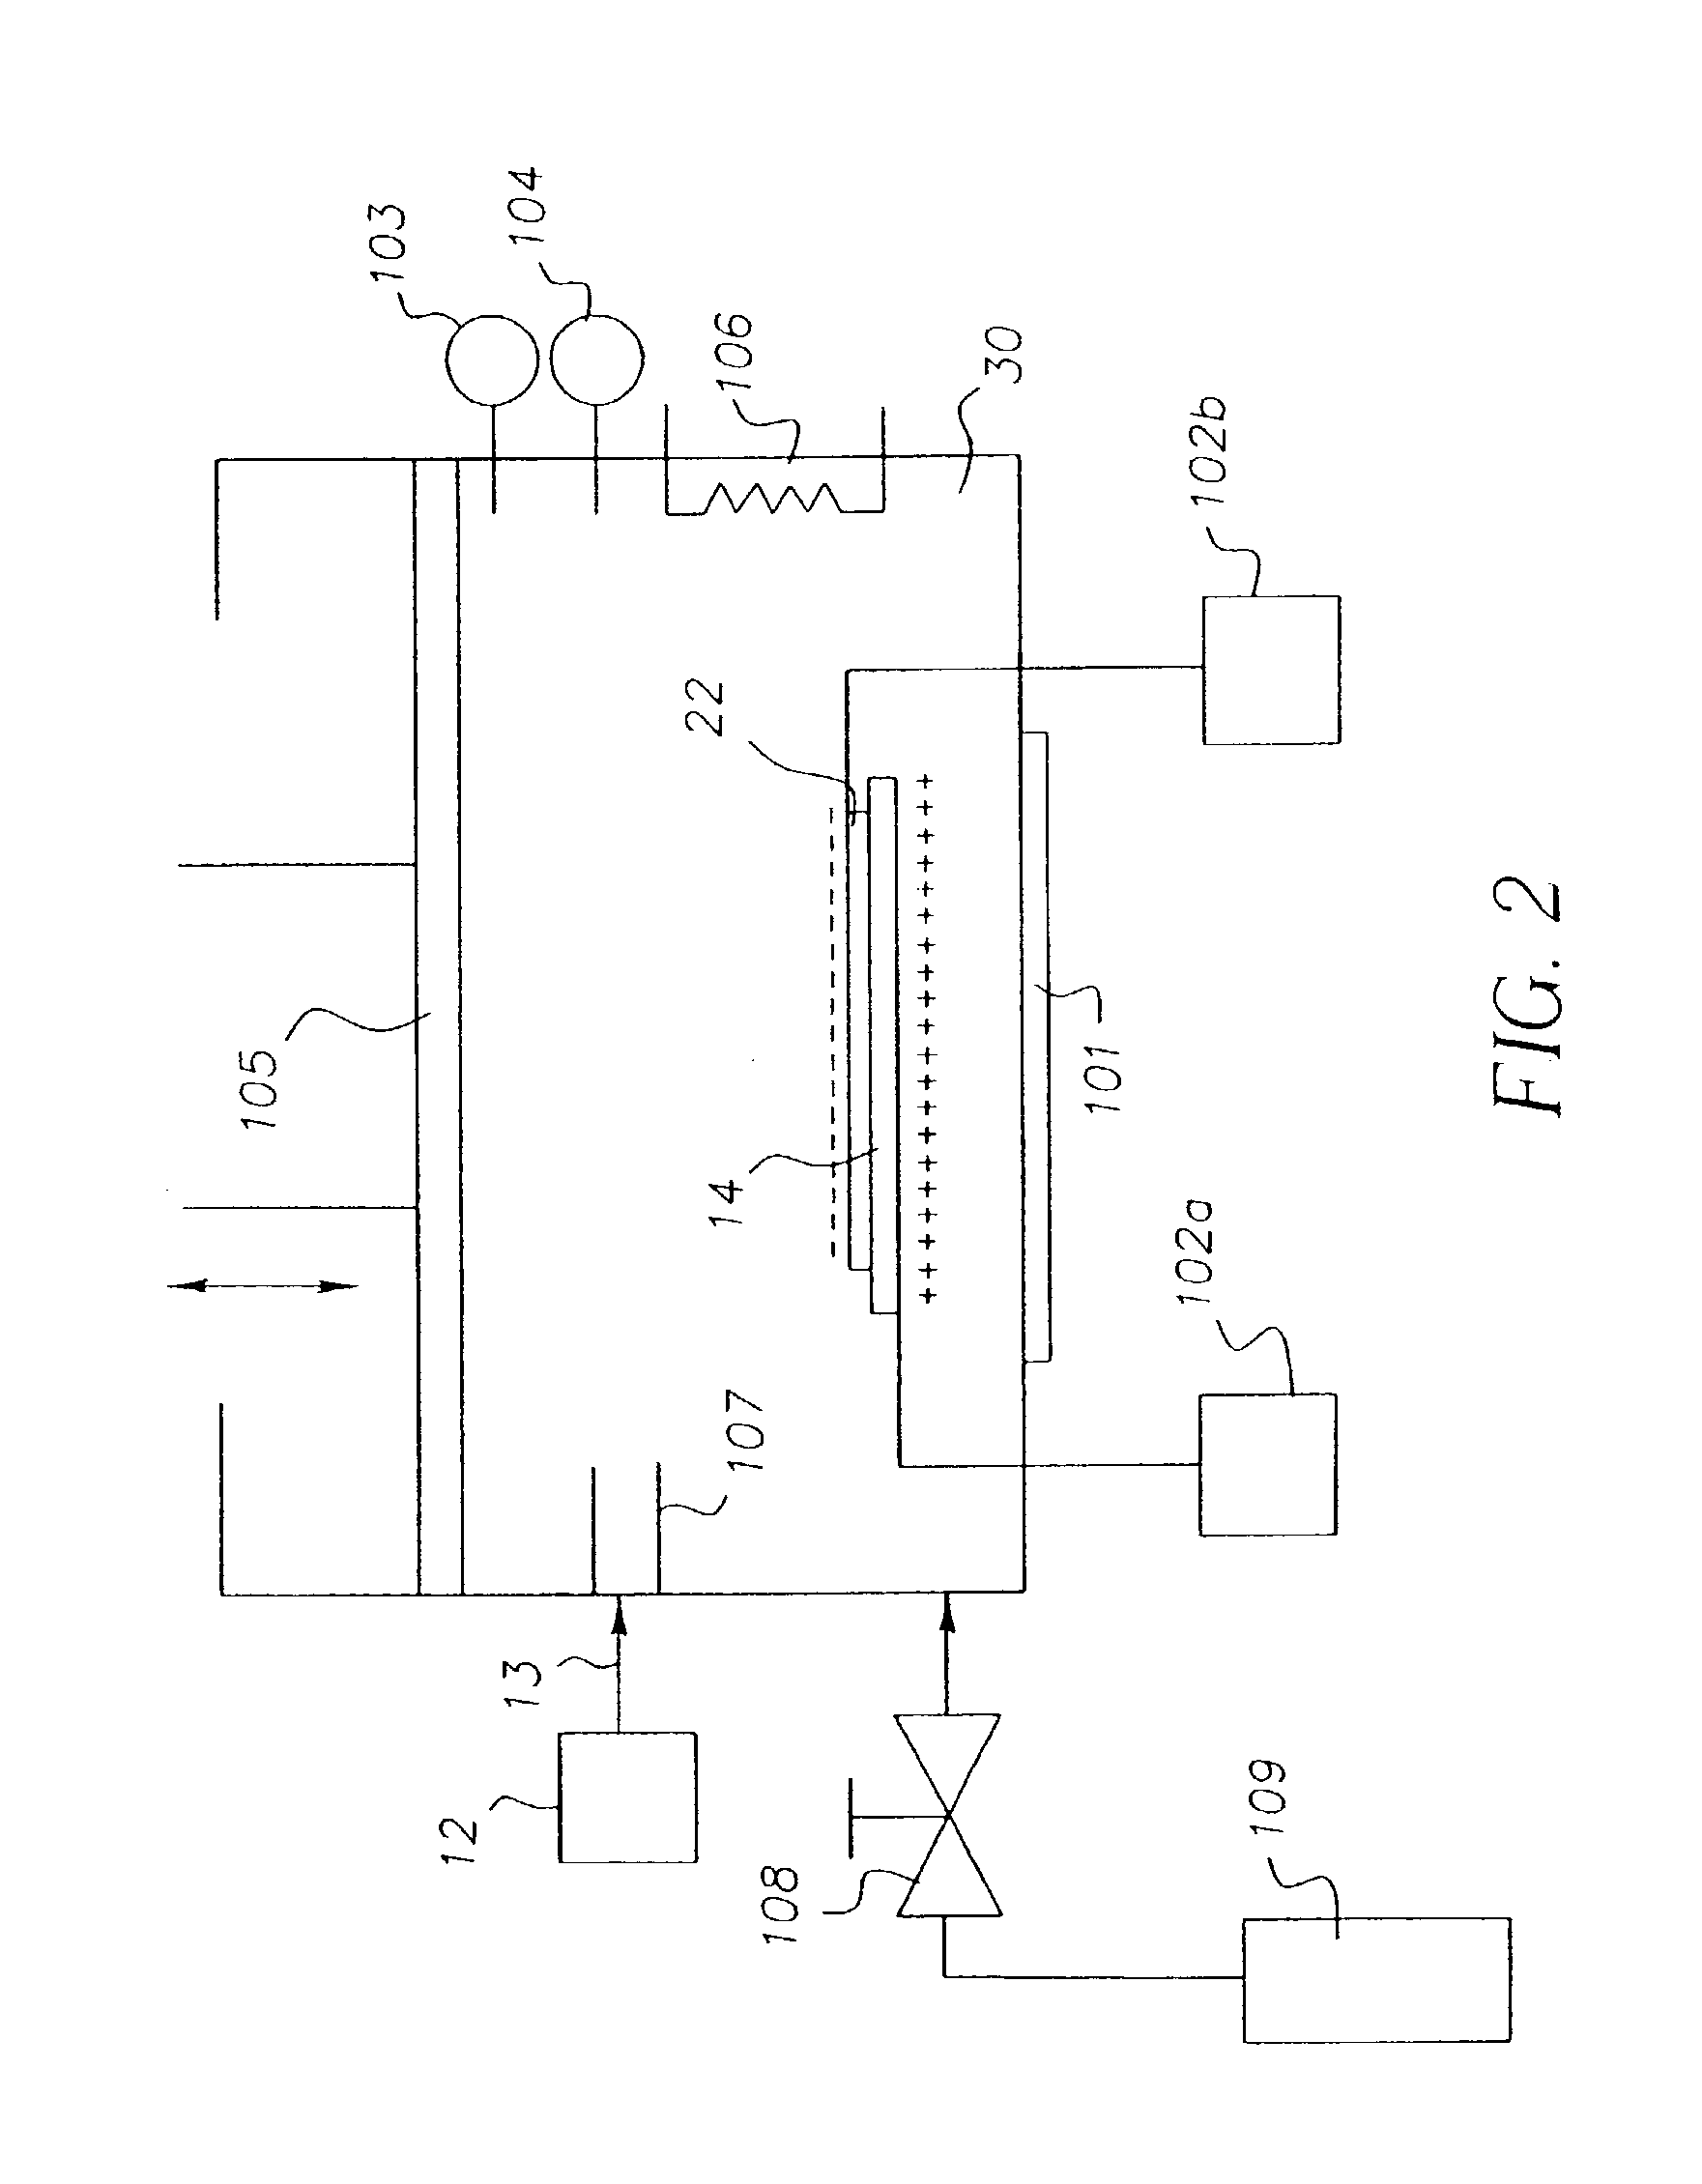 Method of manufacturing a color filter